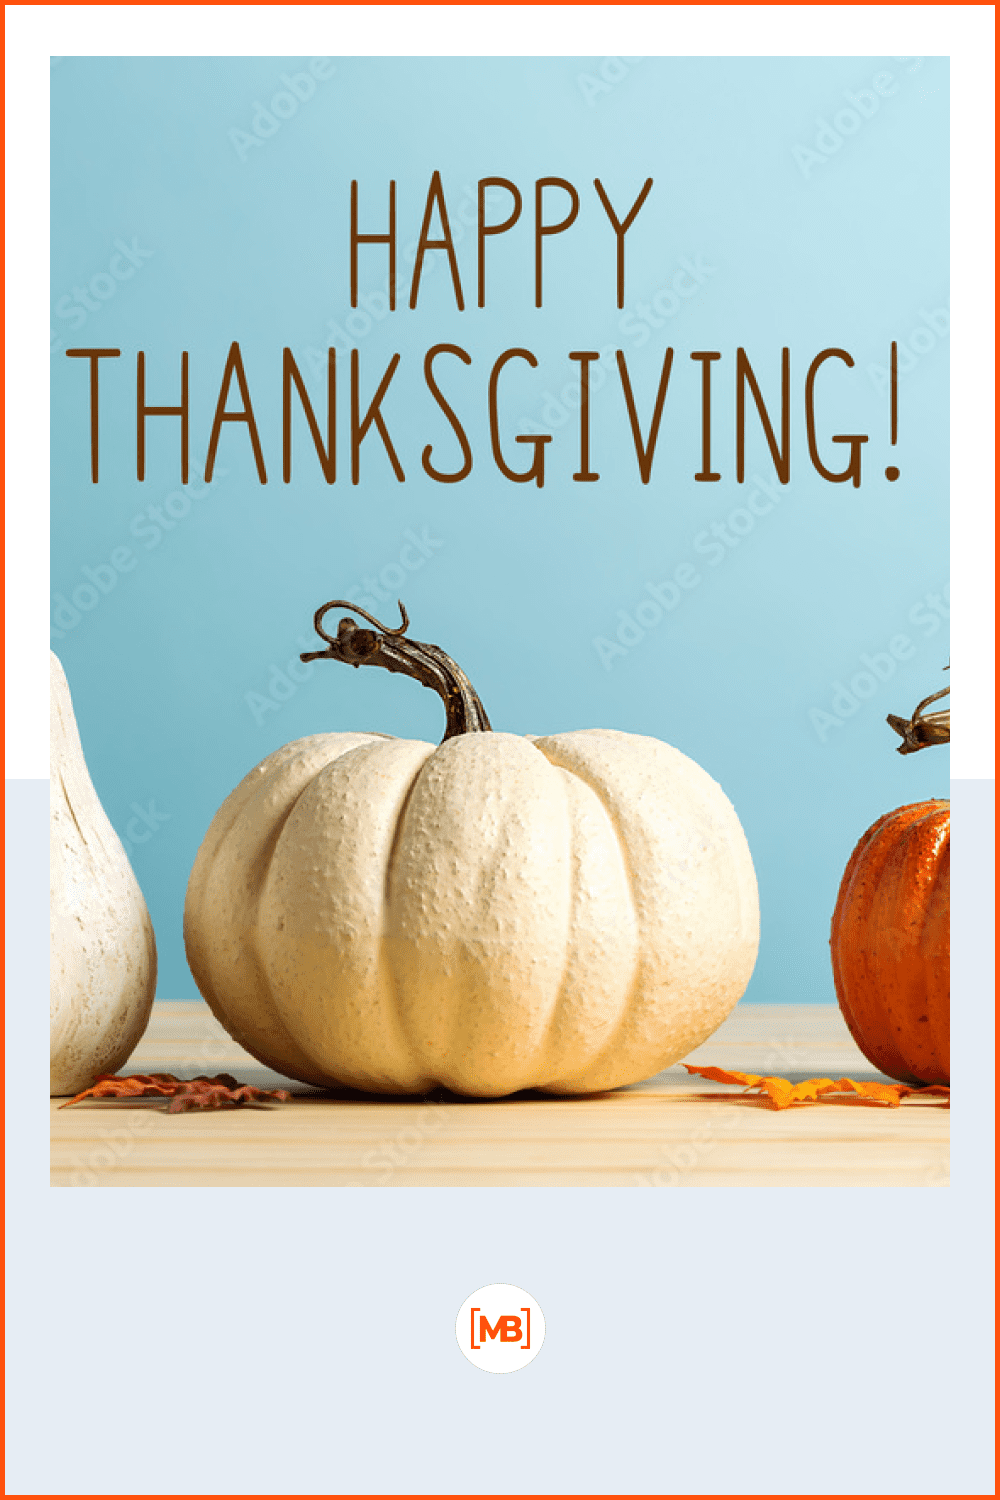 Thanksgiving message with pumpkins on a blue background by Tierney.